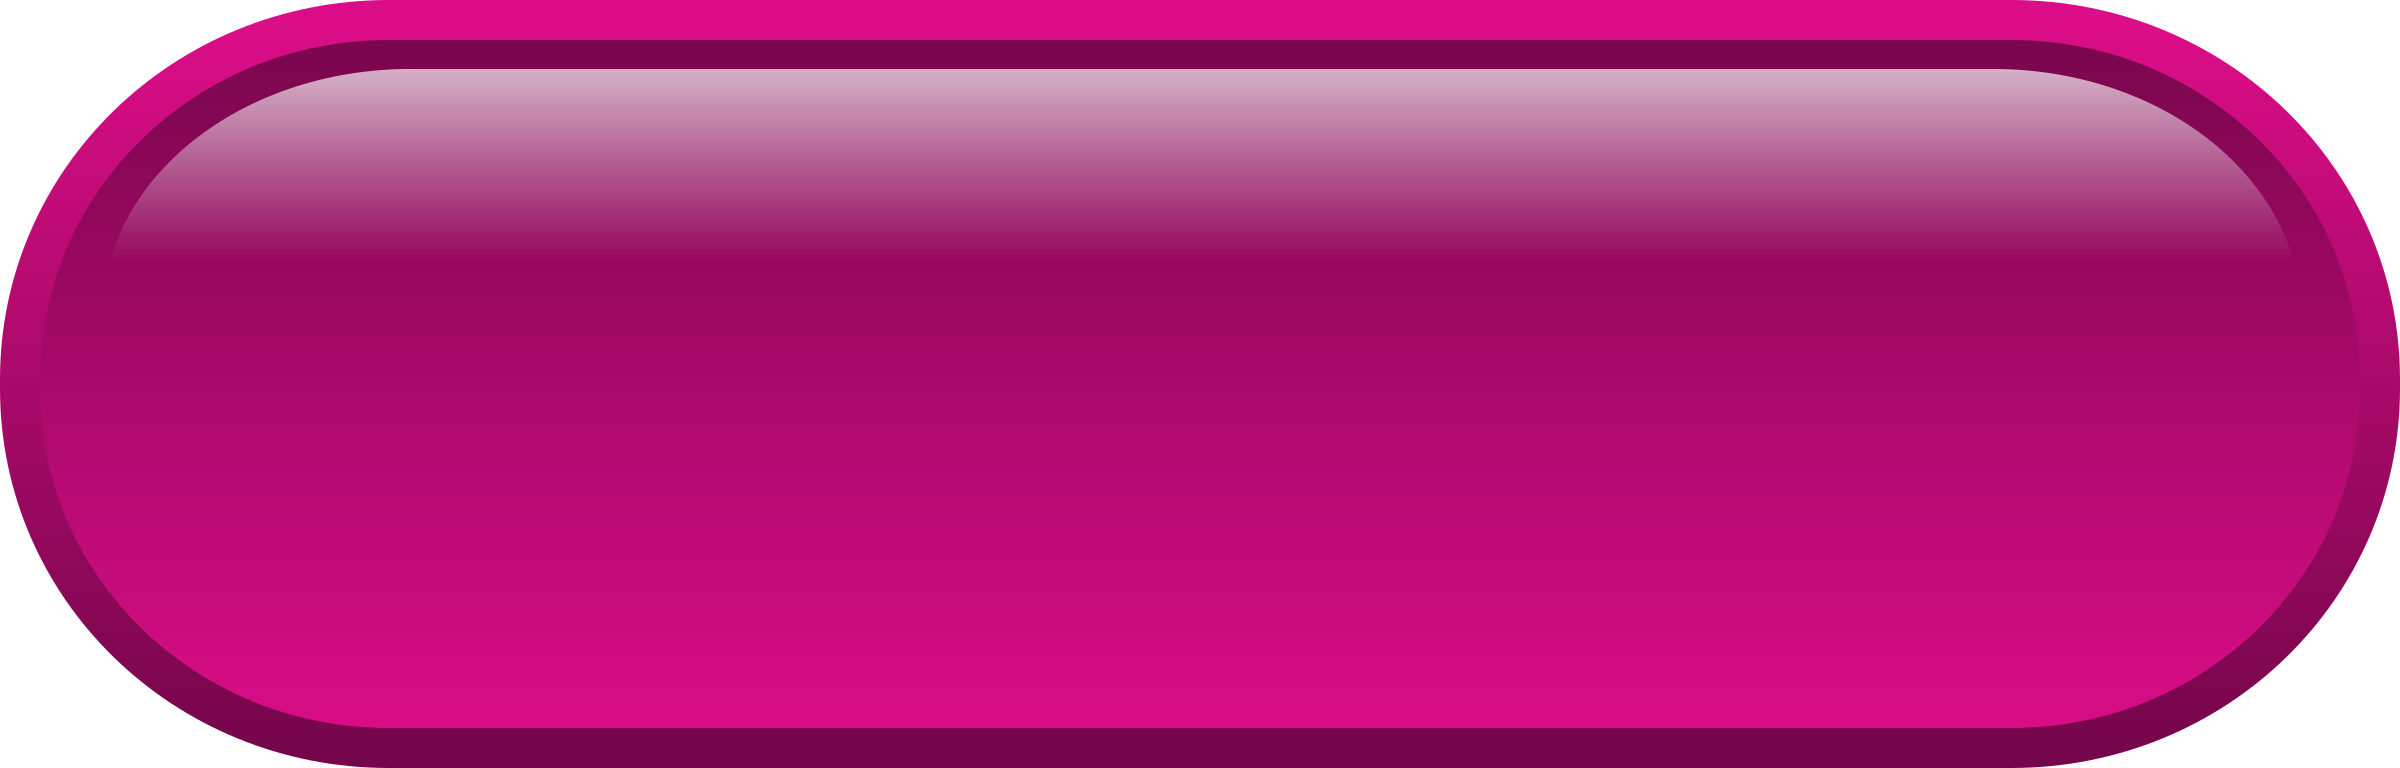 Pink Purple Button Maroon Violet Magenta Now PNG Image